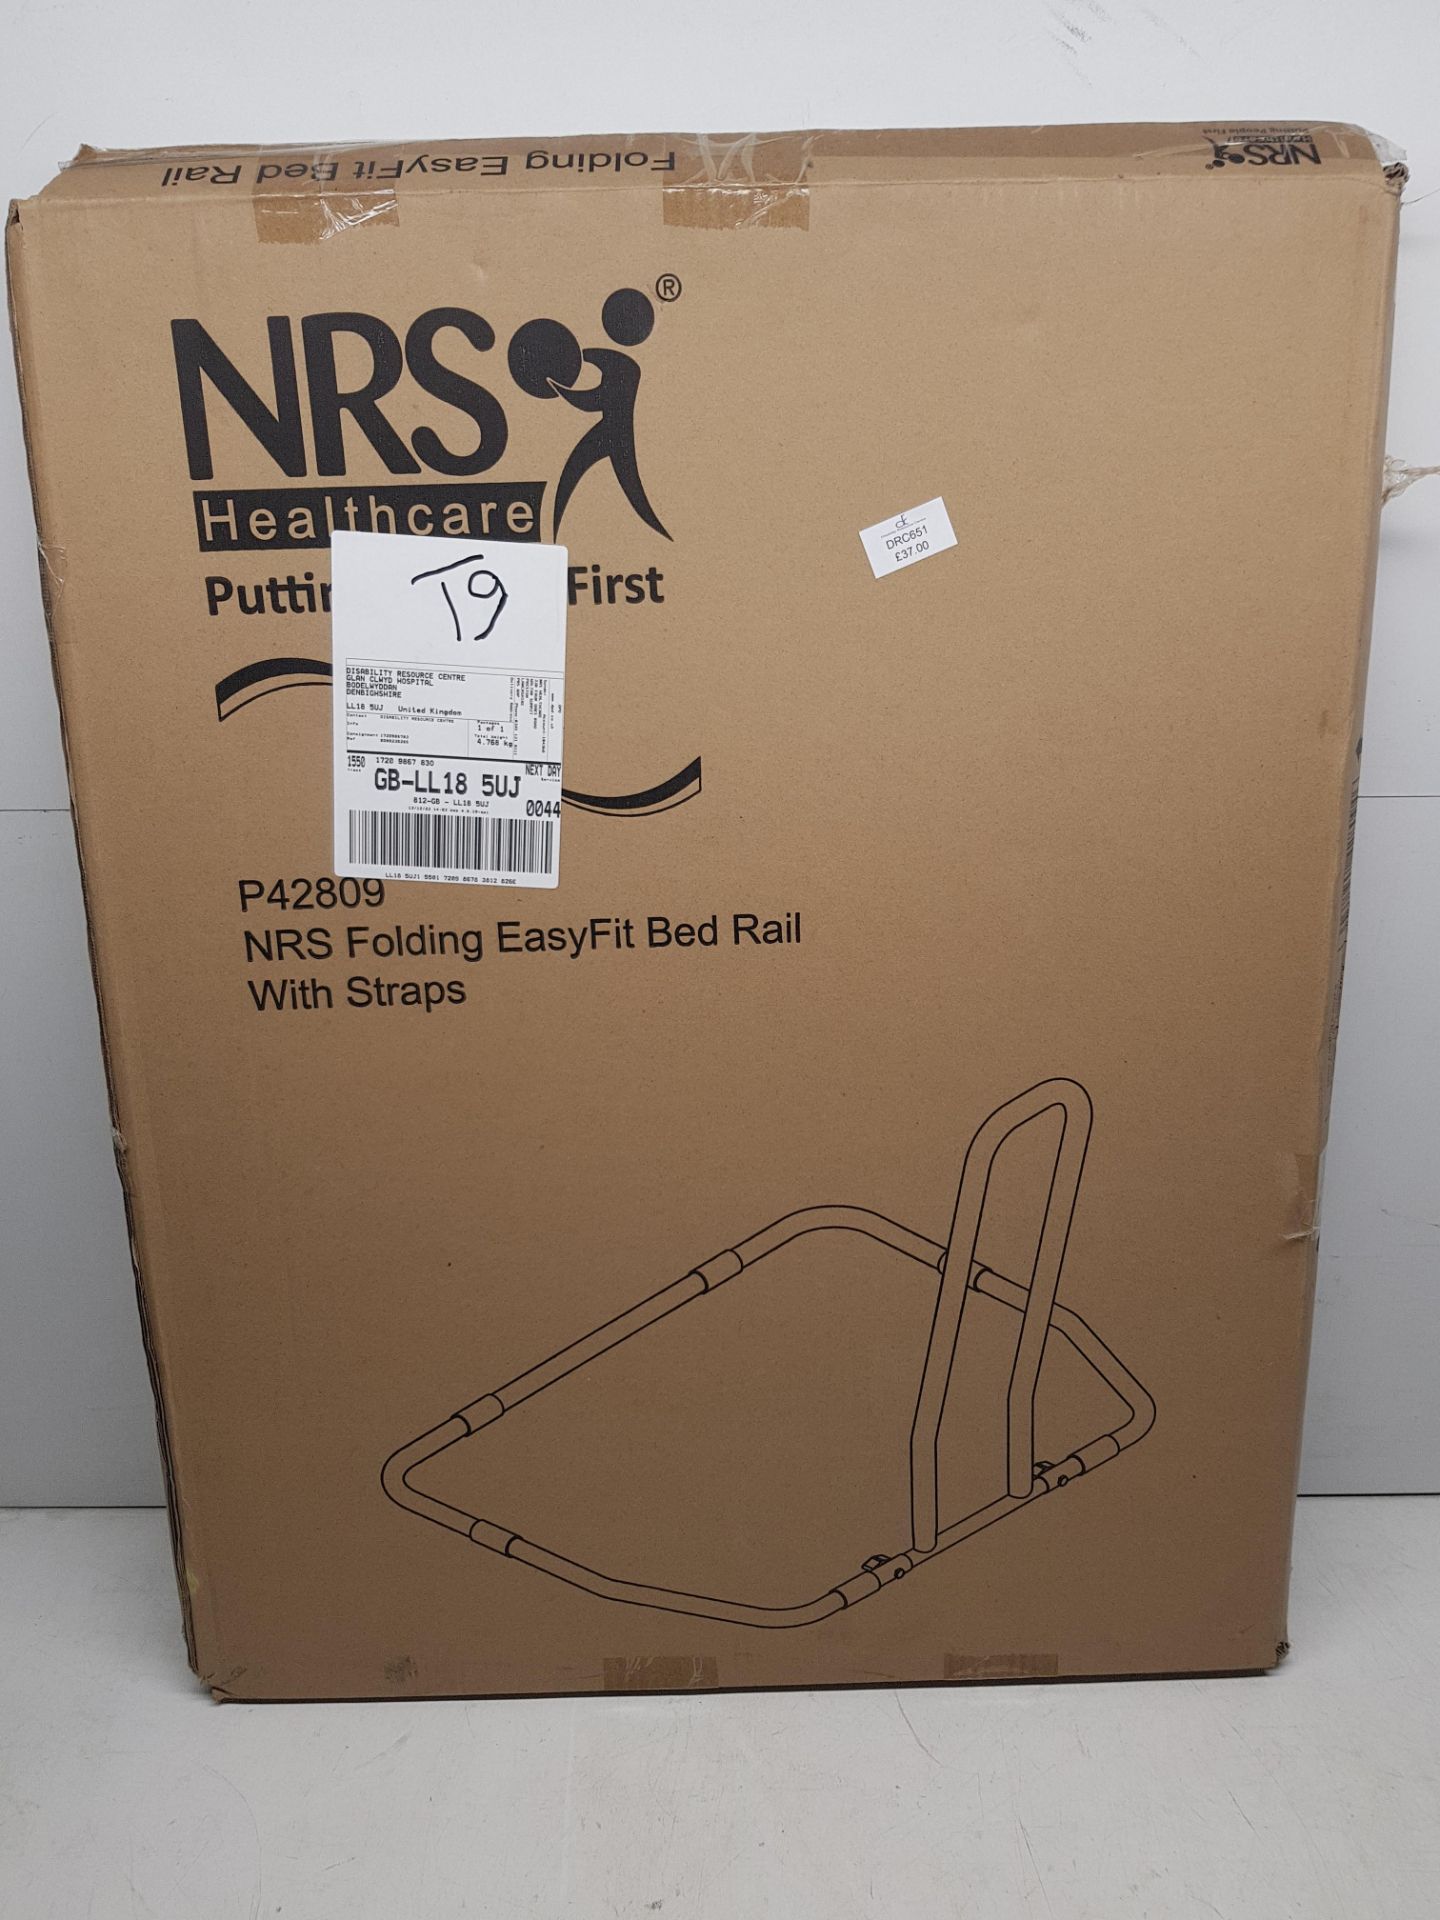 NRS Folding Easy fit Bed Rail With Straps - Image 2 of 2